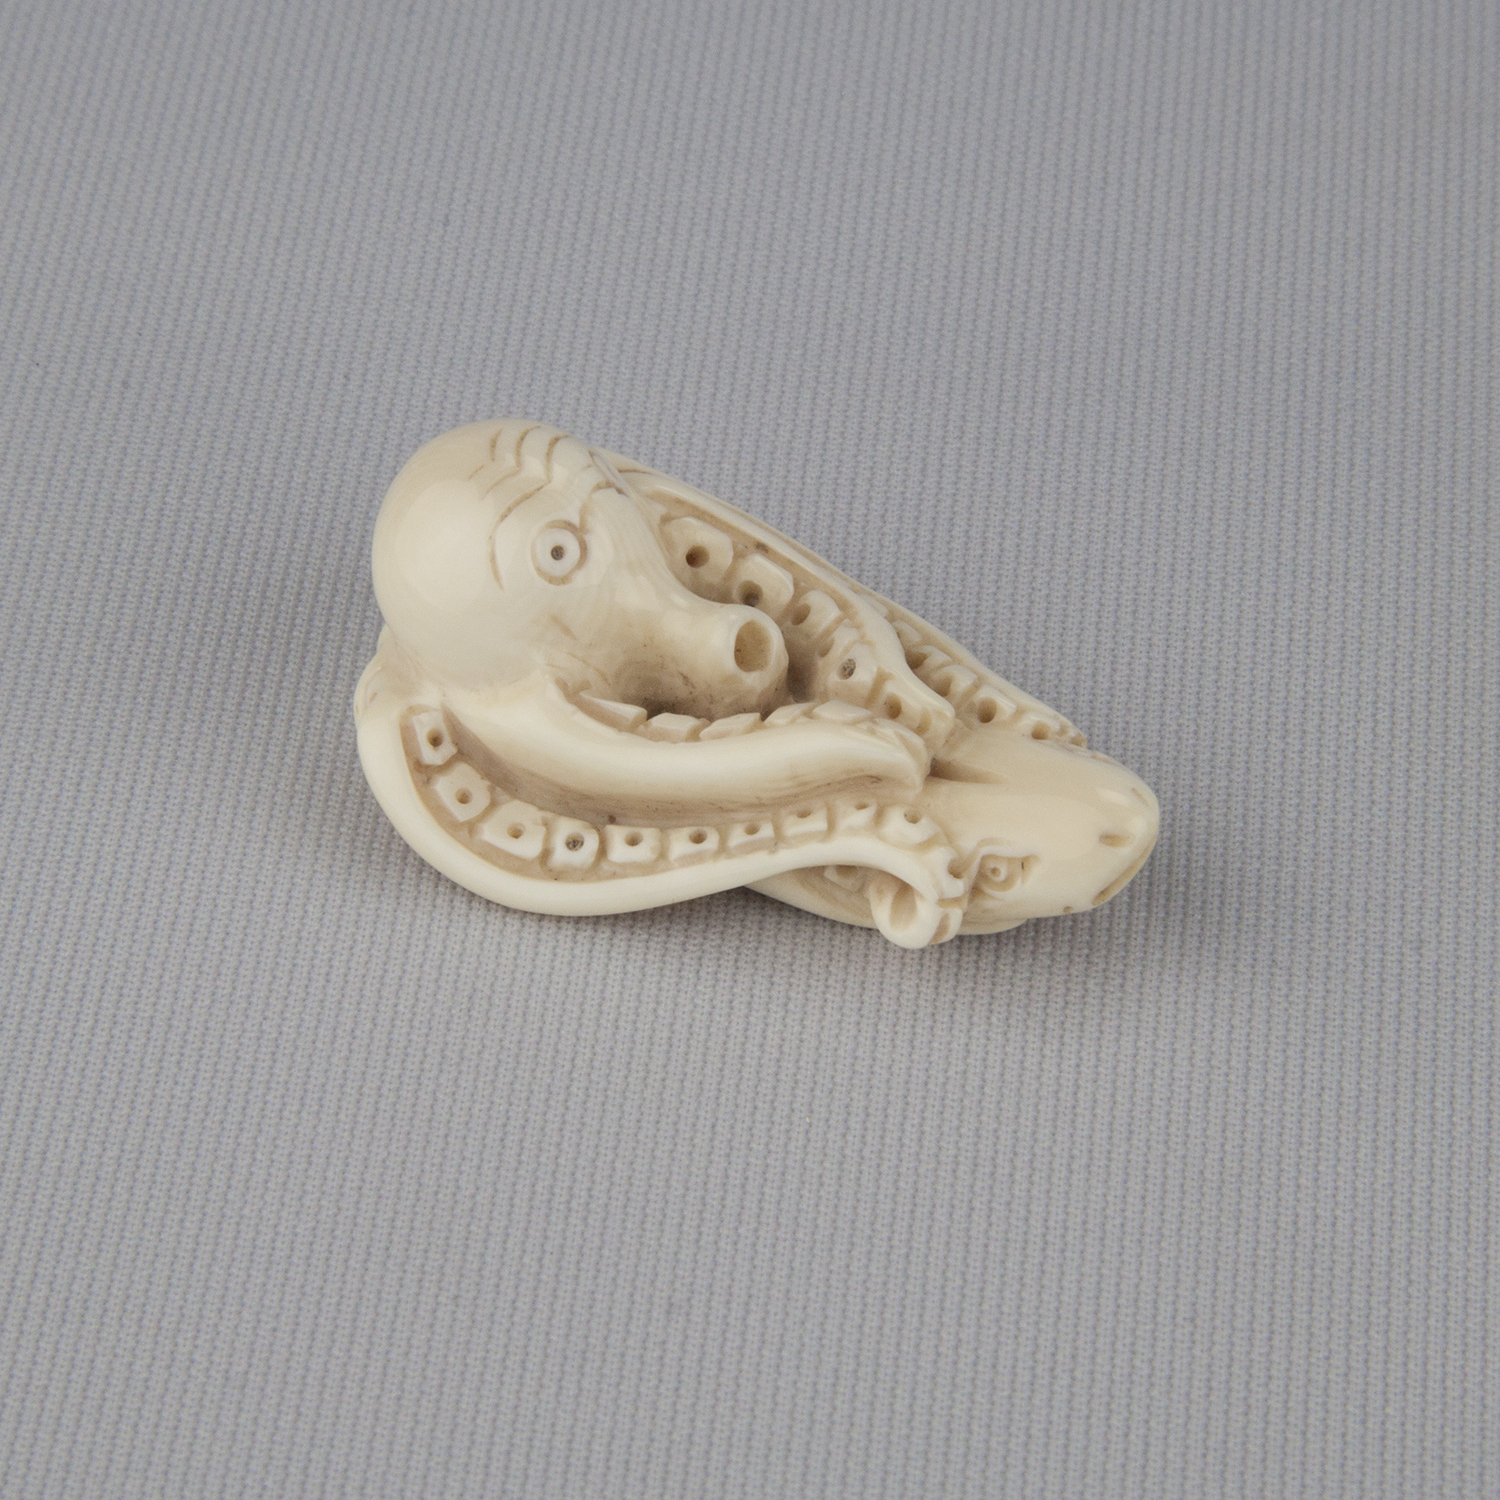 Netsuke depicting an octopus holding a shark, ca. 18th–19th century, Ivory, Gift of Mr. and Mrs. Nathaniel I. Grey, 1988.122